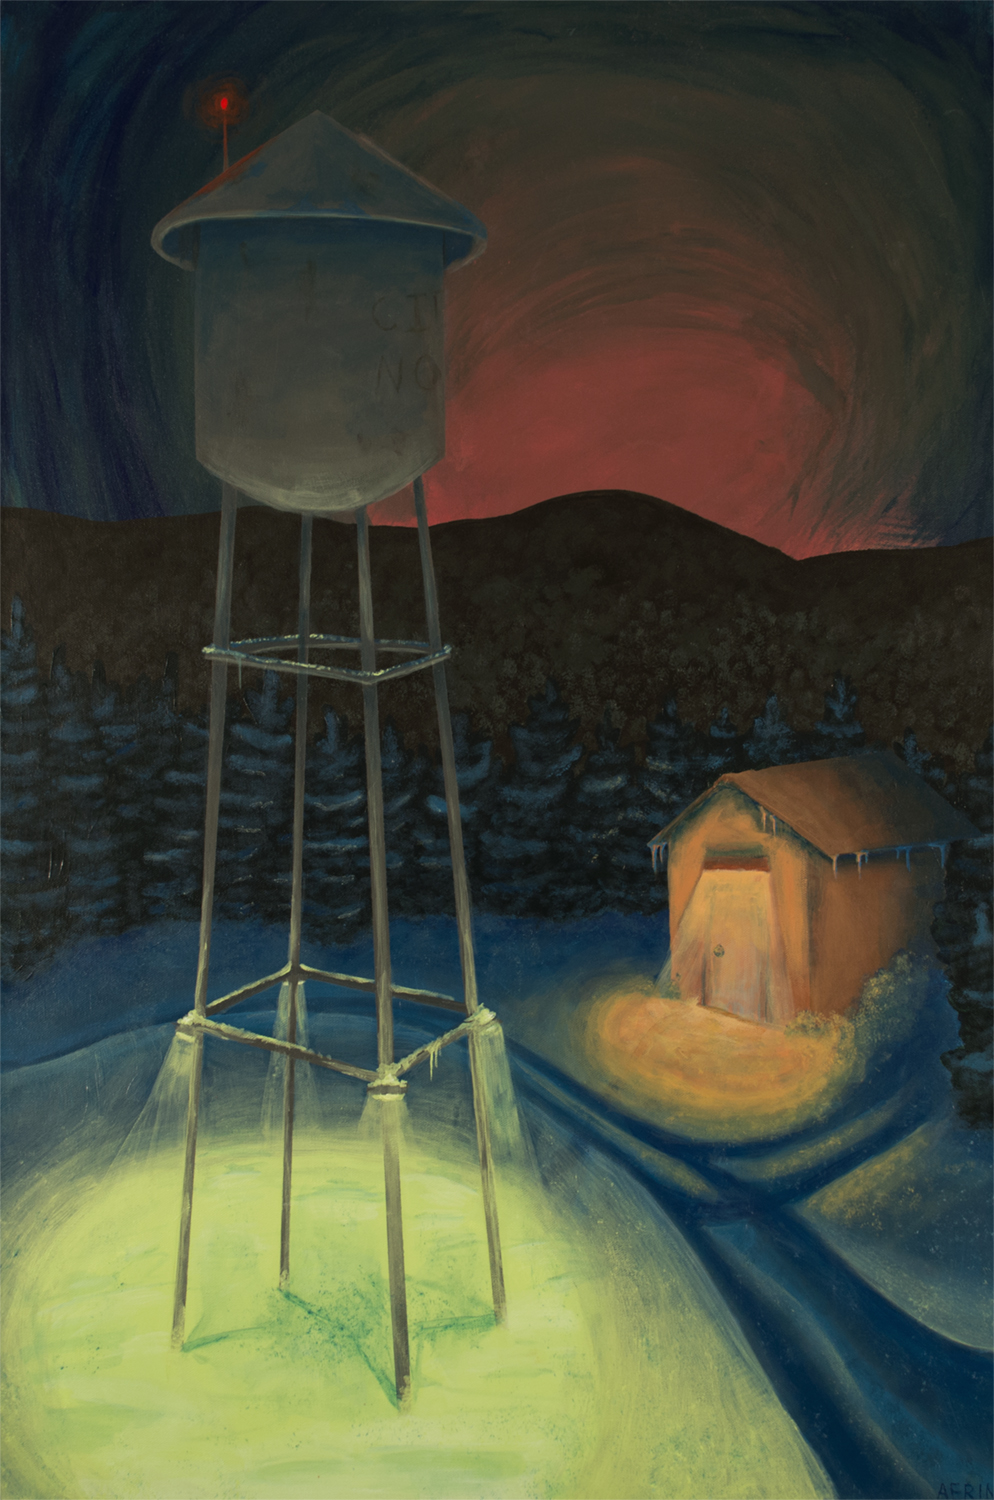 A water tower and building late at night, courtesy of the artist